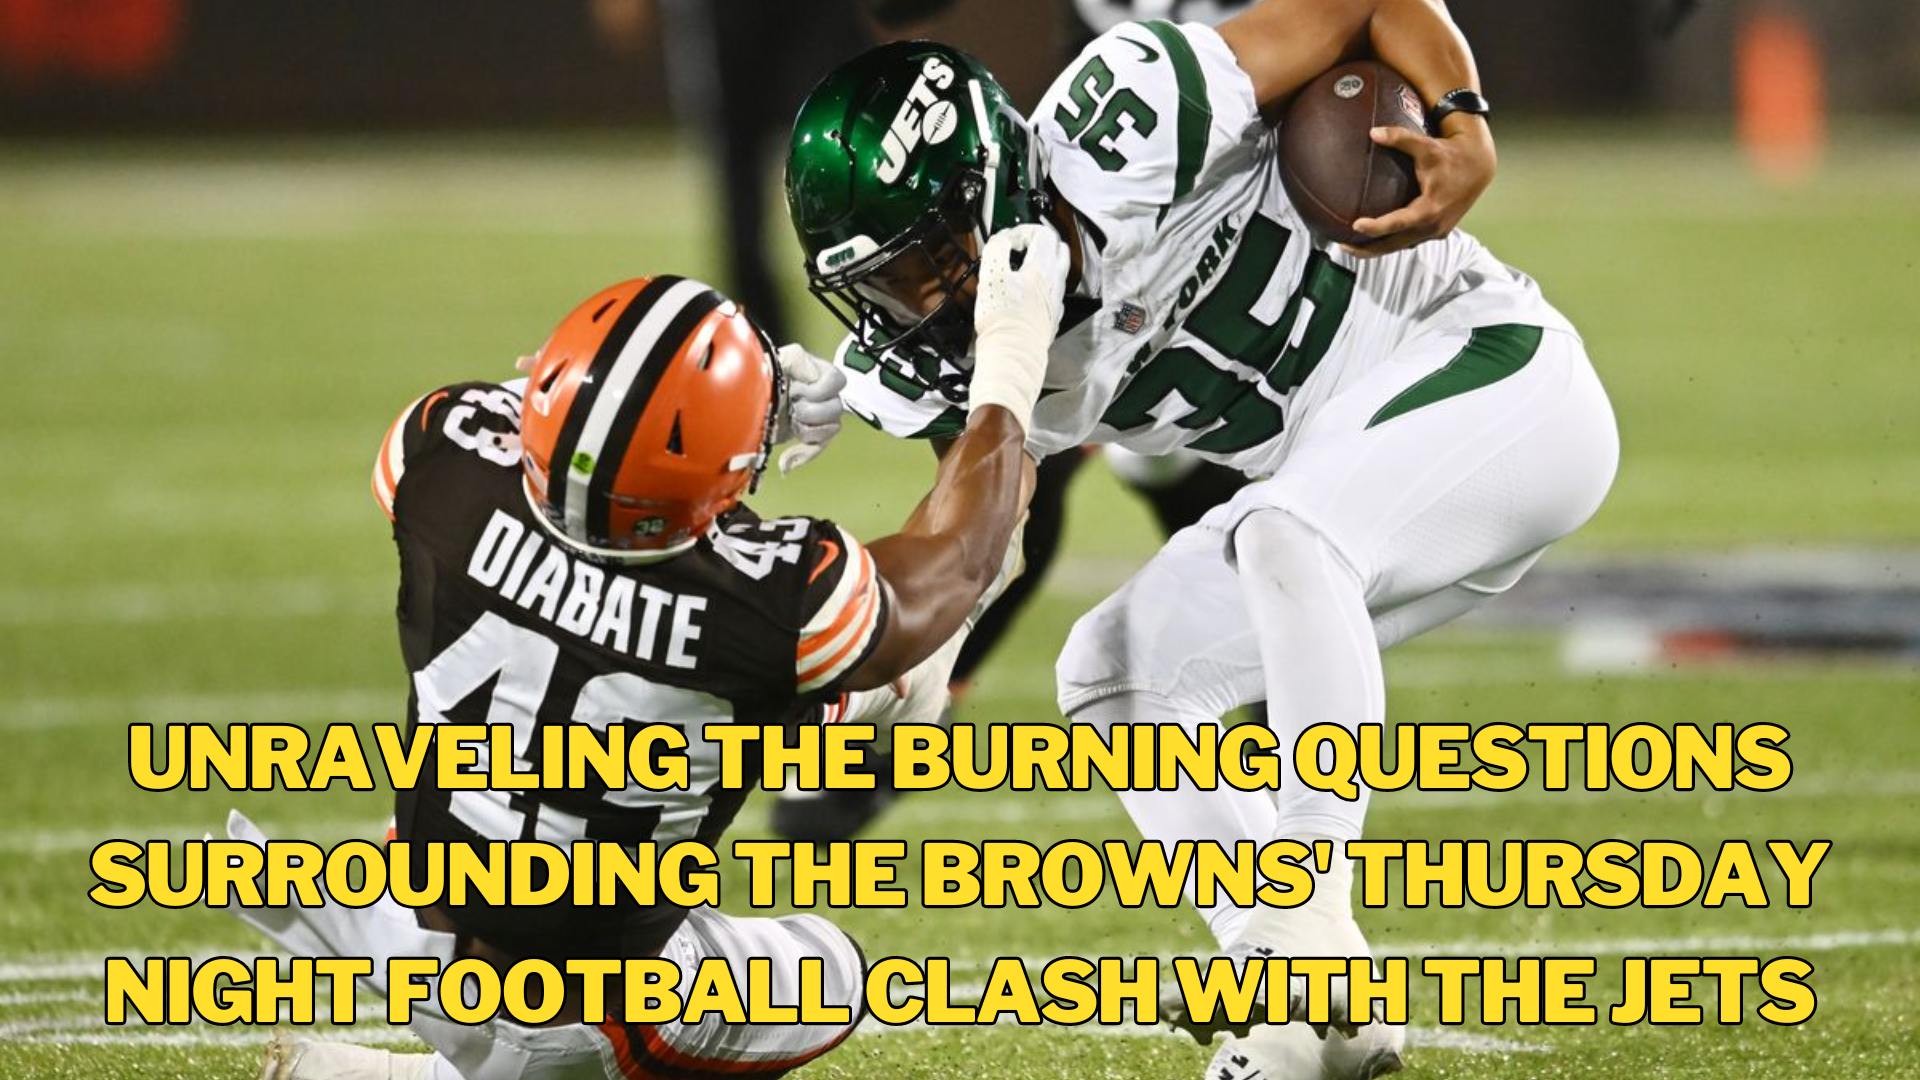 Unraveling the Burning Questions Surrounding the Browns’ Thursday Night Football Clash with the Jets